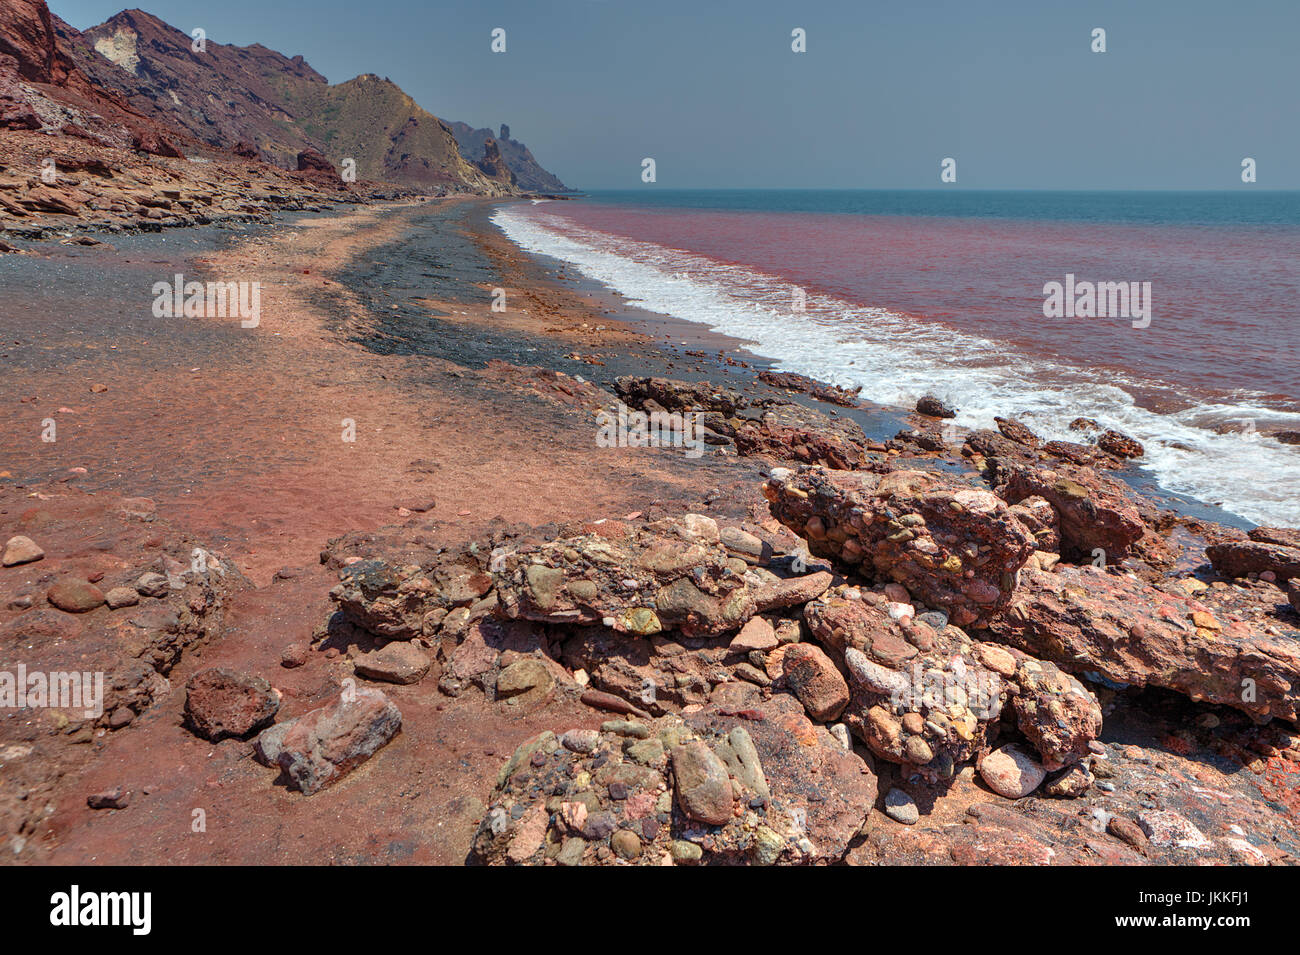 Red coast on the Iranian island of Hormoz, Hormozgan Province, Southern Iran. Stock Photo